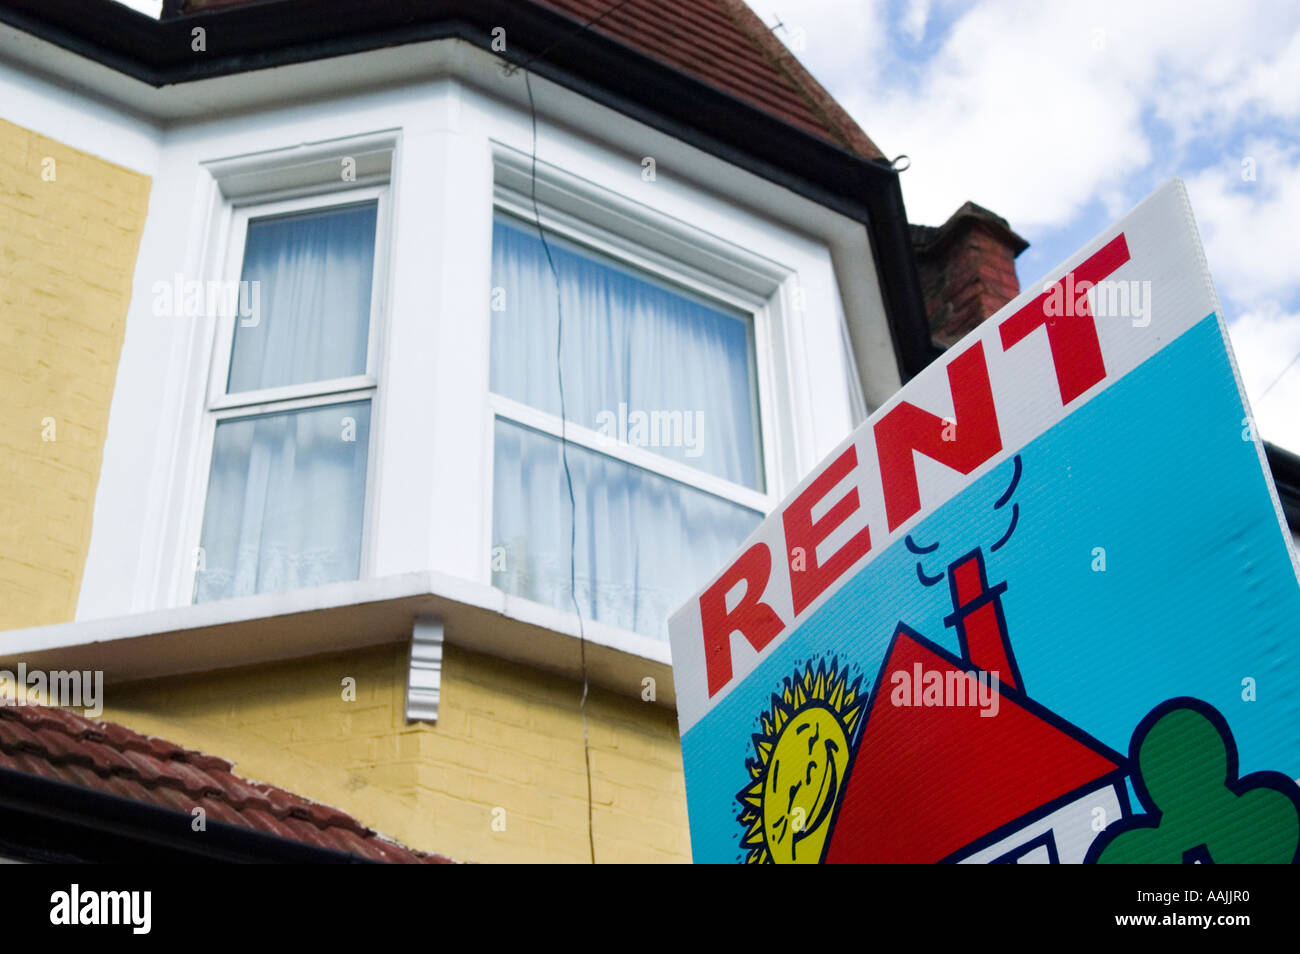 House for rent sign, London, UK Stock Photo